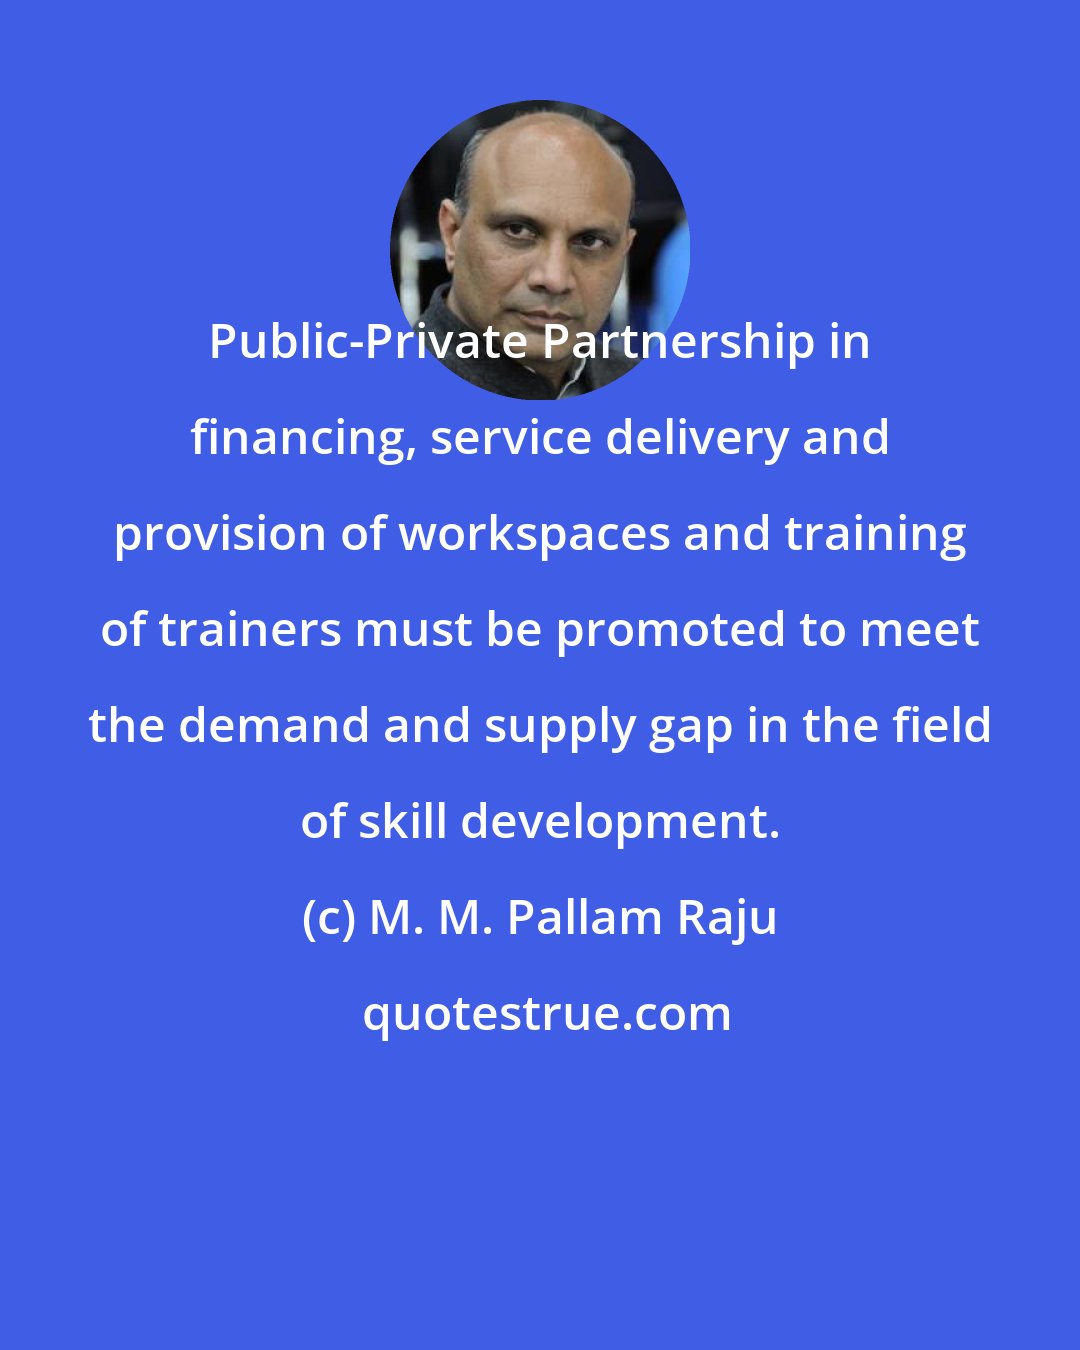 M. M. Pallam Raju: Public-Private Partnership in financing, service delivery and provision of workspaces and training of trainers must be promoted to meet the demand and supply gap in the field of skill development.